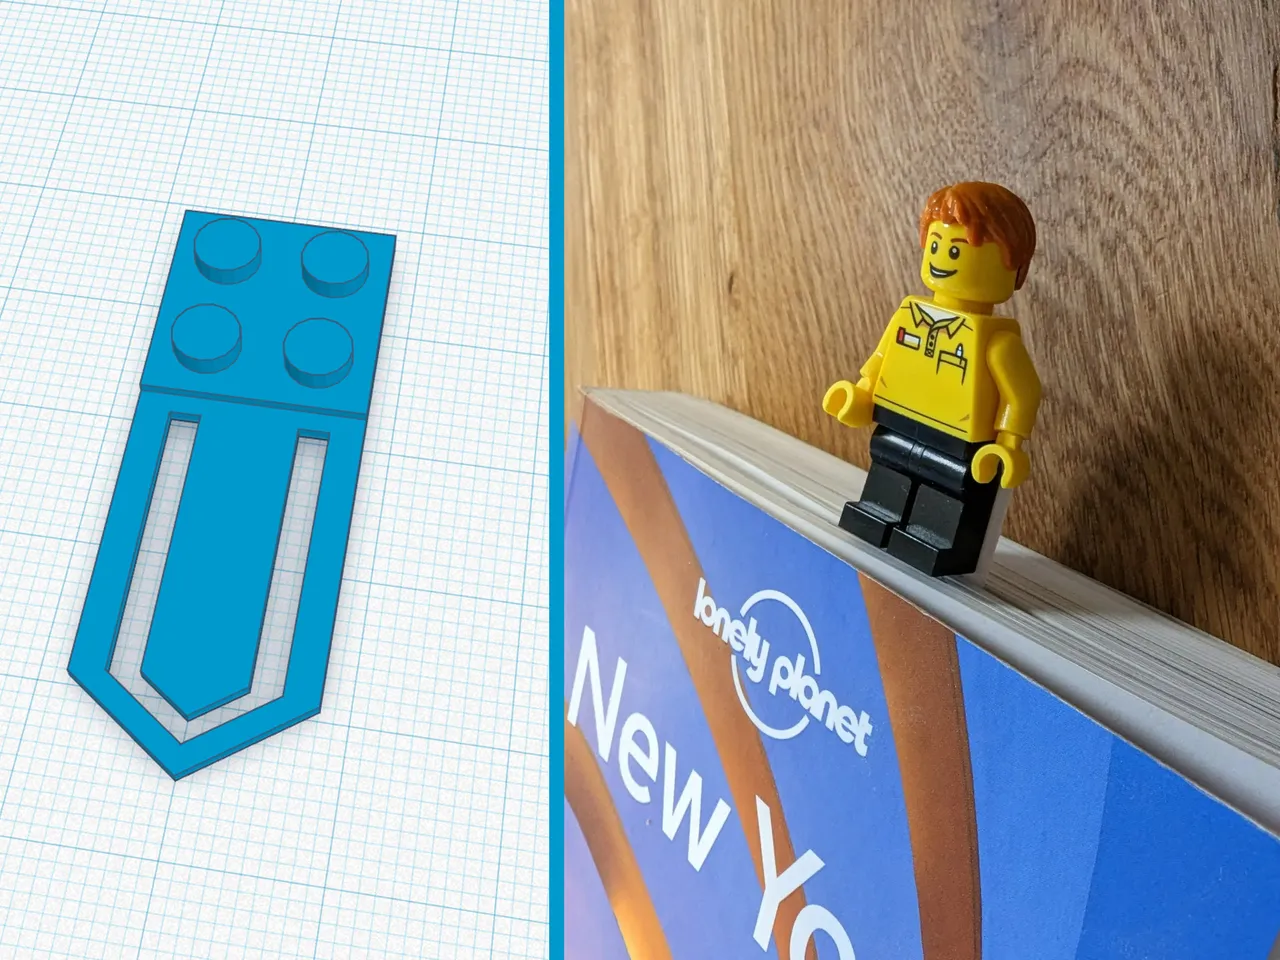 Bookmark - Lego compatible by Martin Th.